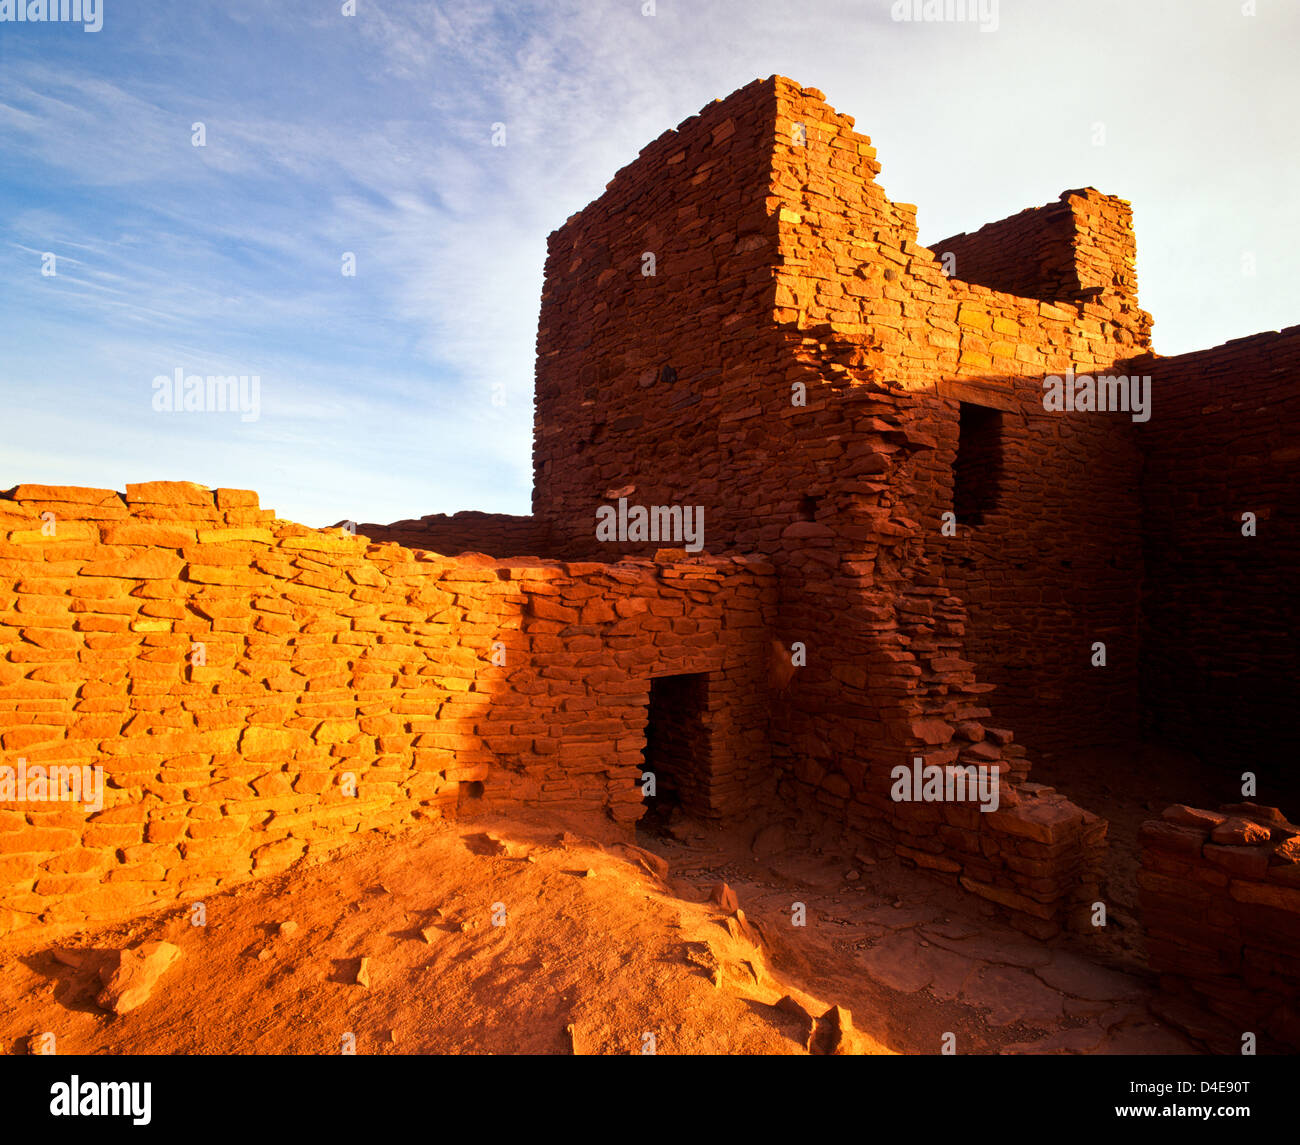 The Wupatki National Monument is a National Monument located in north-central Arizona, near Flagstaff. Stock Photo